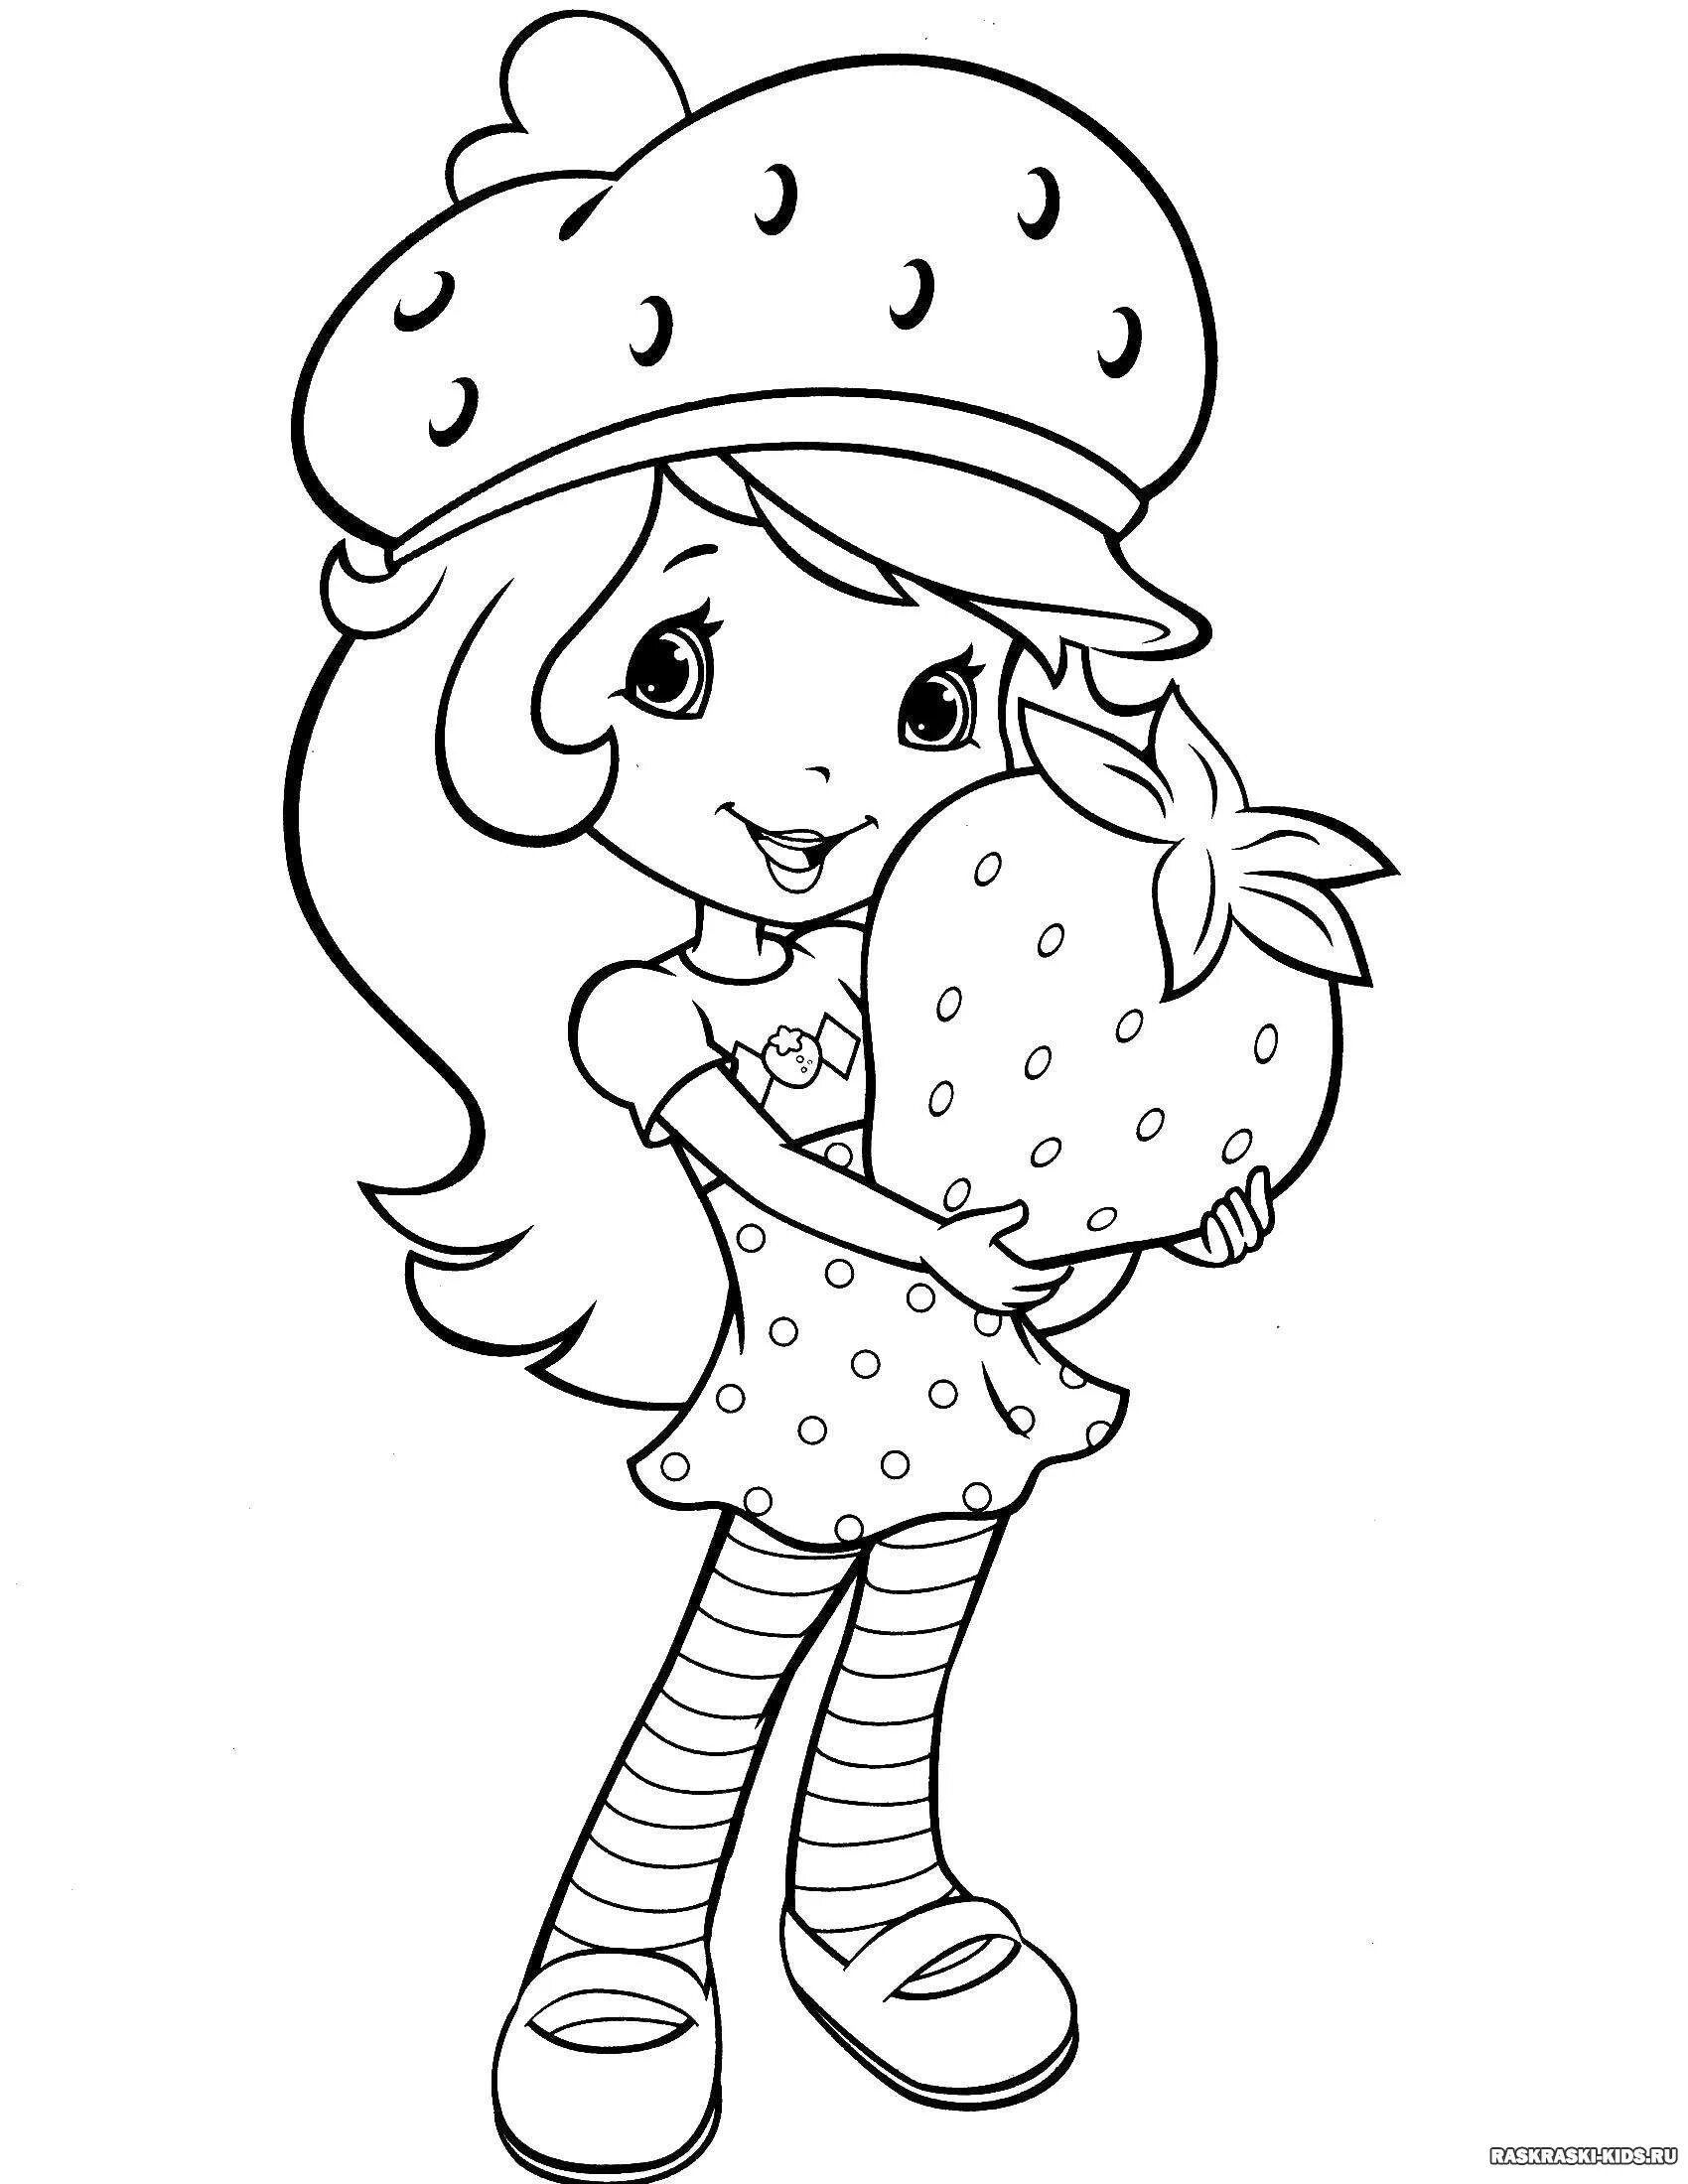 Inspirational coloring page 4 for girls